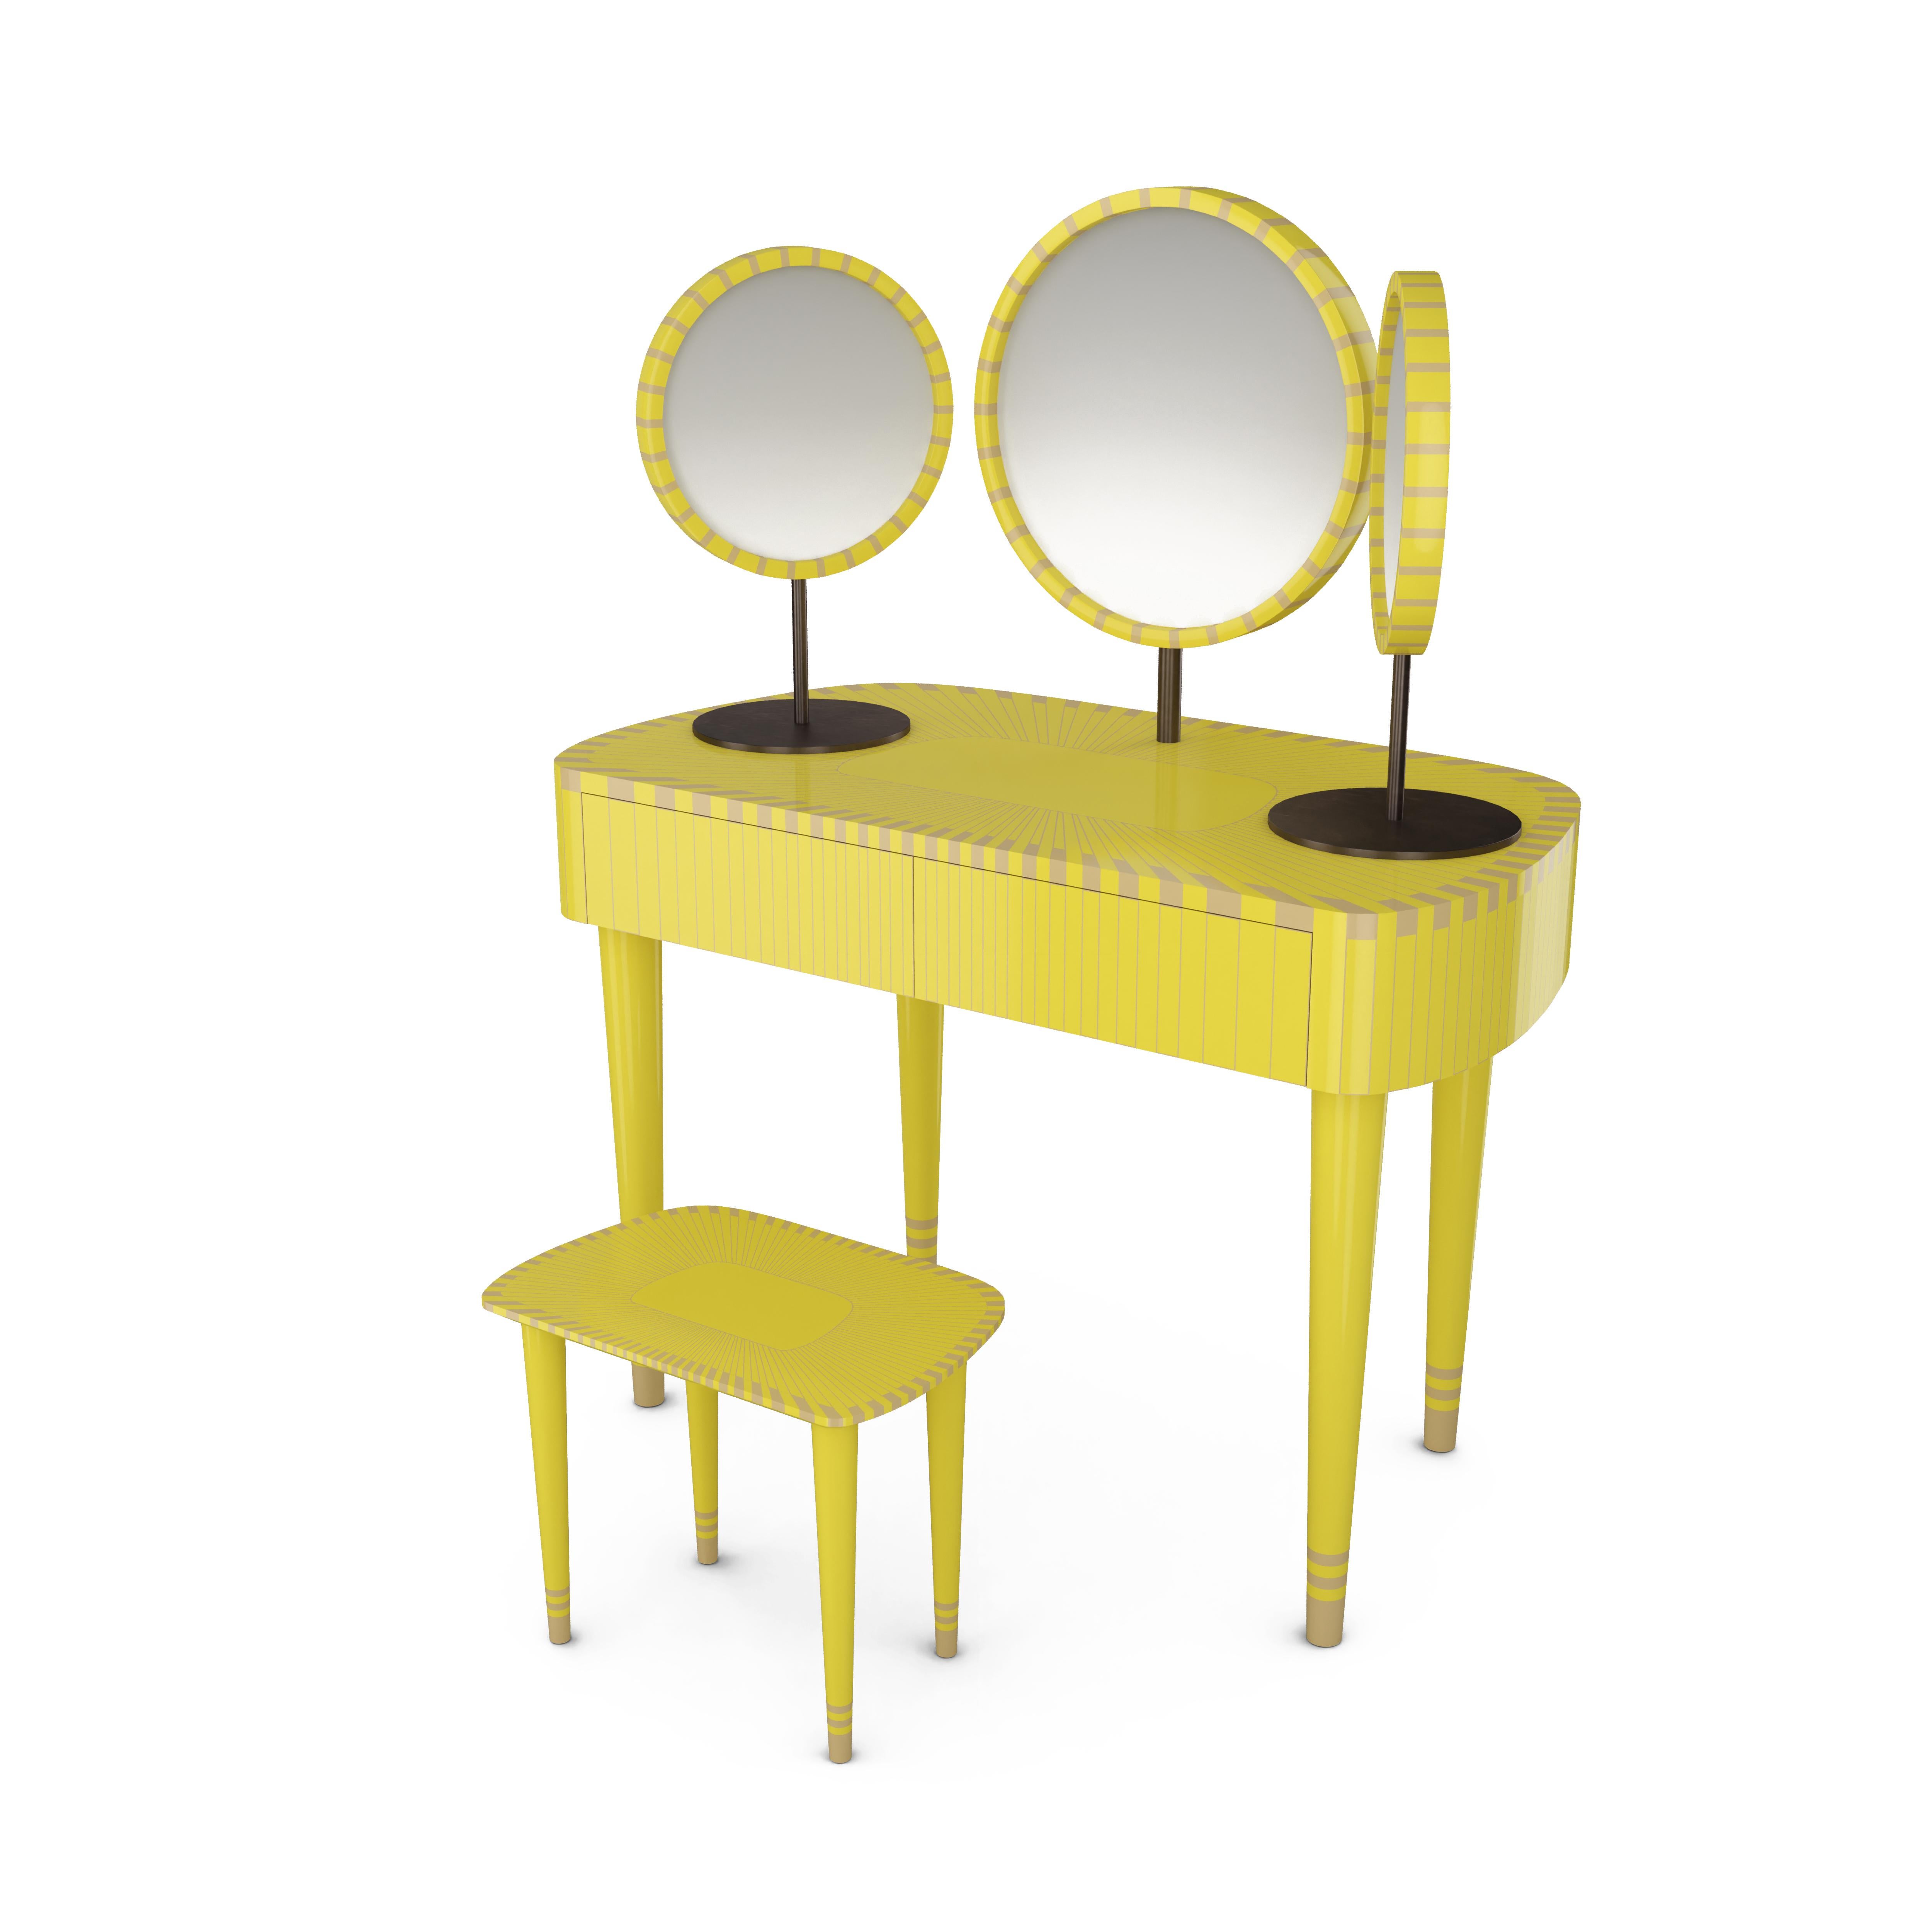 Woman in Paris lime vanity table by Matteo Cibic is a stunning dressing table with two drawers and three mirrors, two of which can be moved to desired angles. It is available in a range of colors, which can be customized according to the